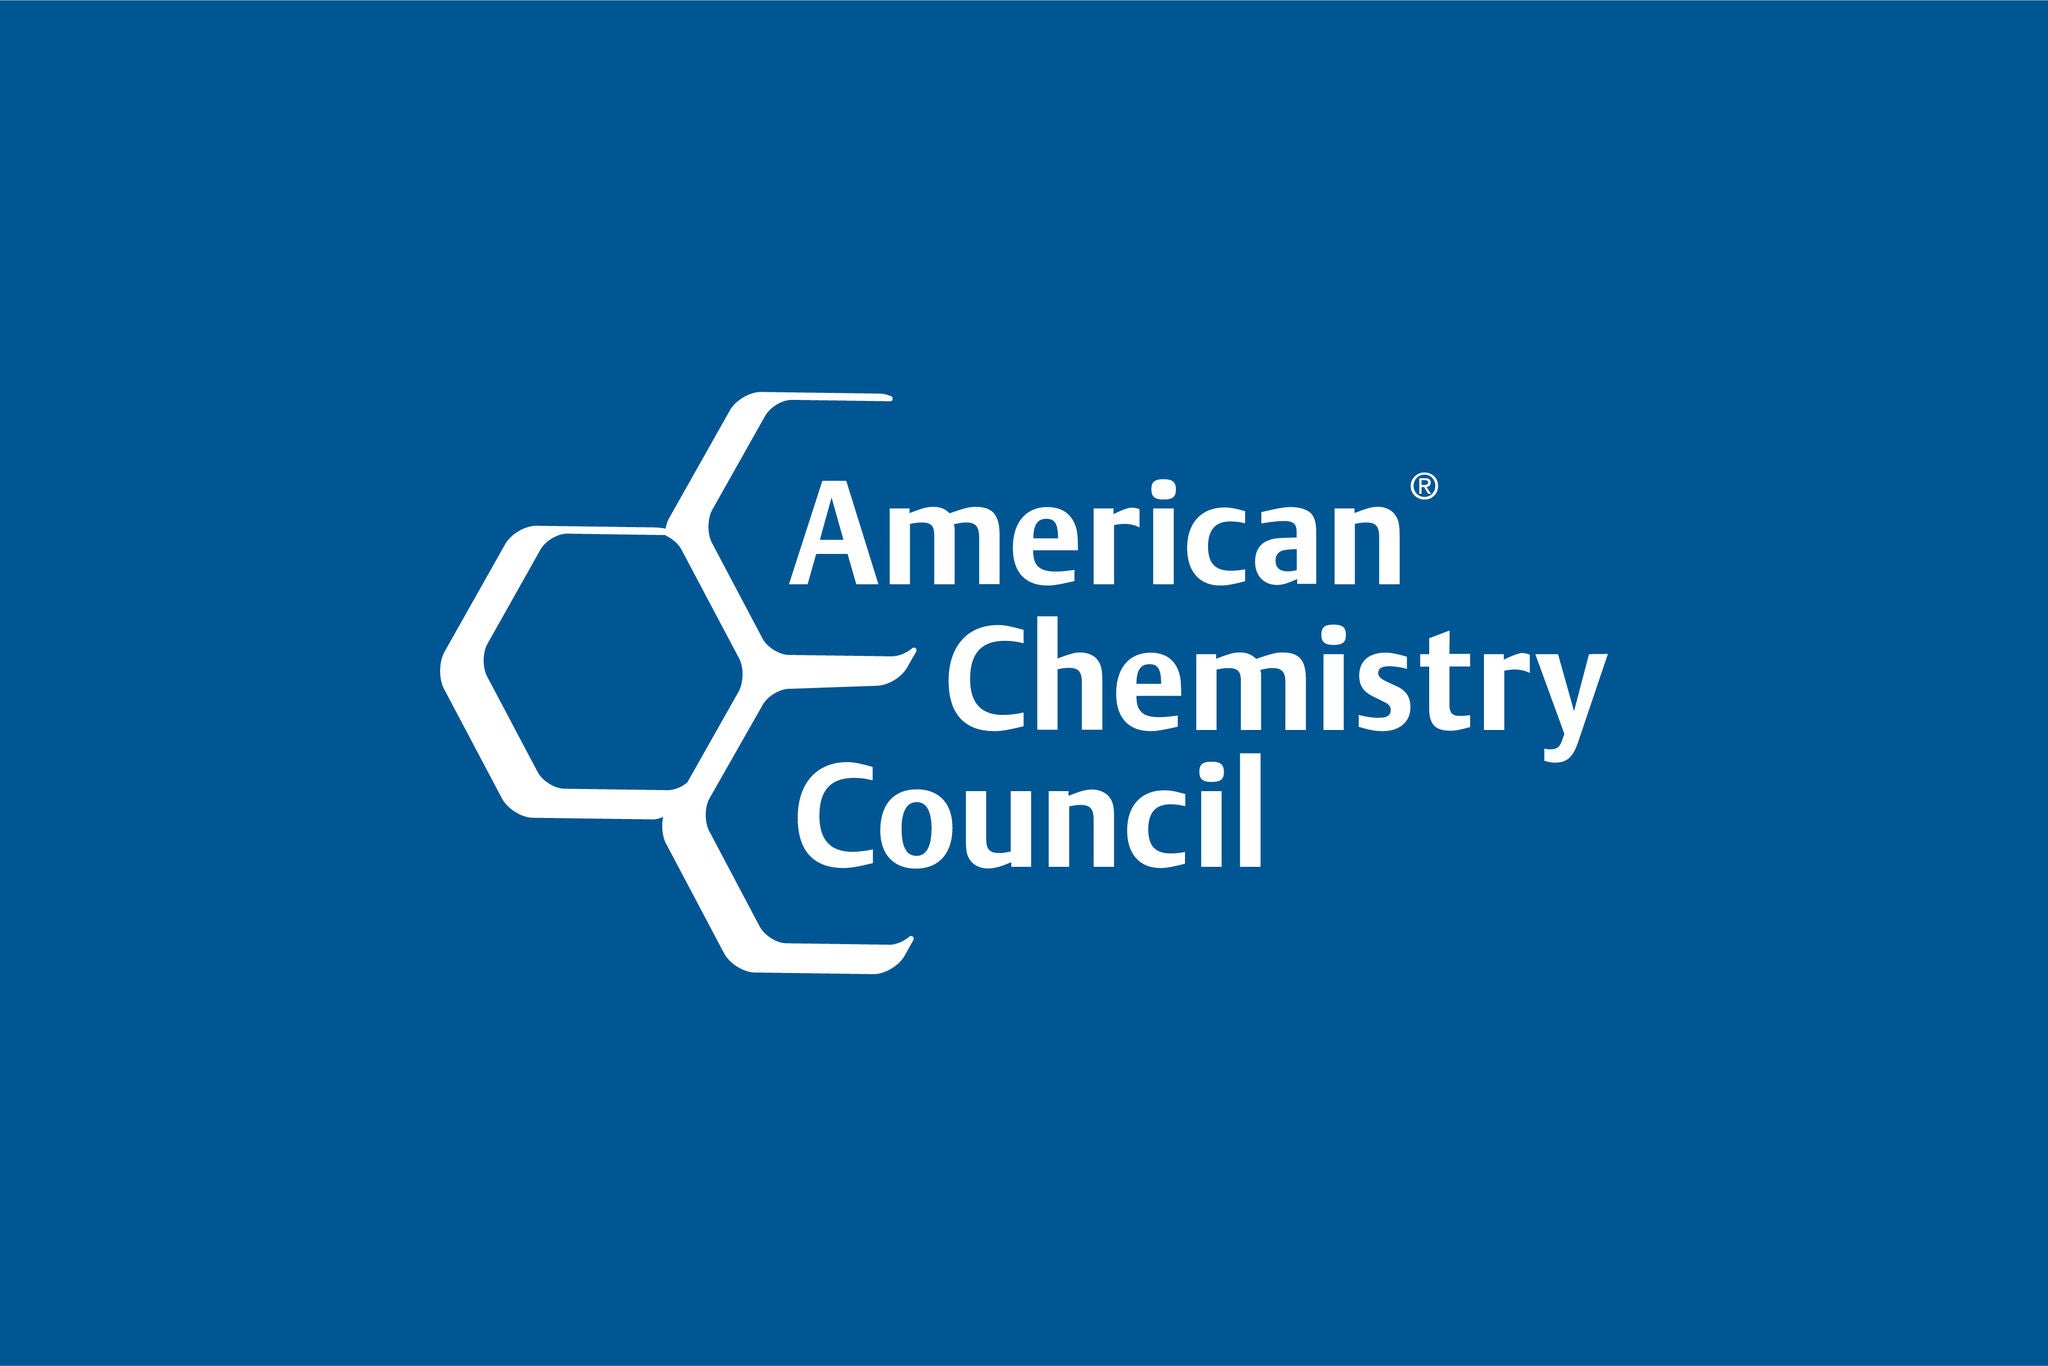 White text with the American Chemistry Council logo on a blue square representing the Responsible Care Energy Efficiency Award for sustainable rail transport